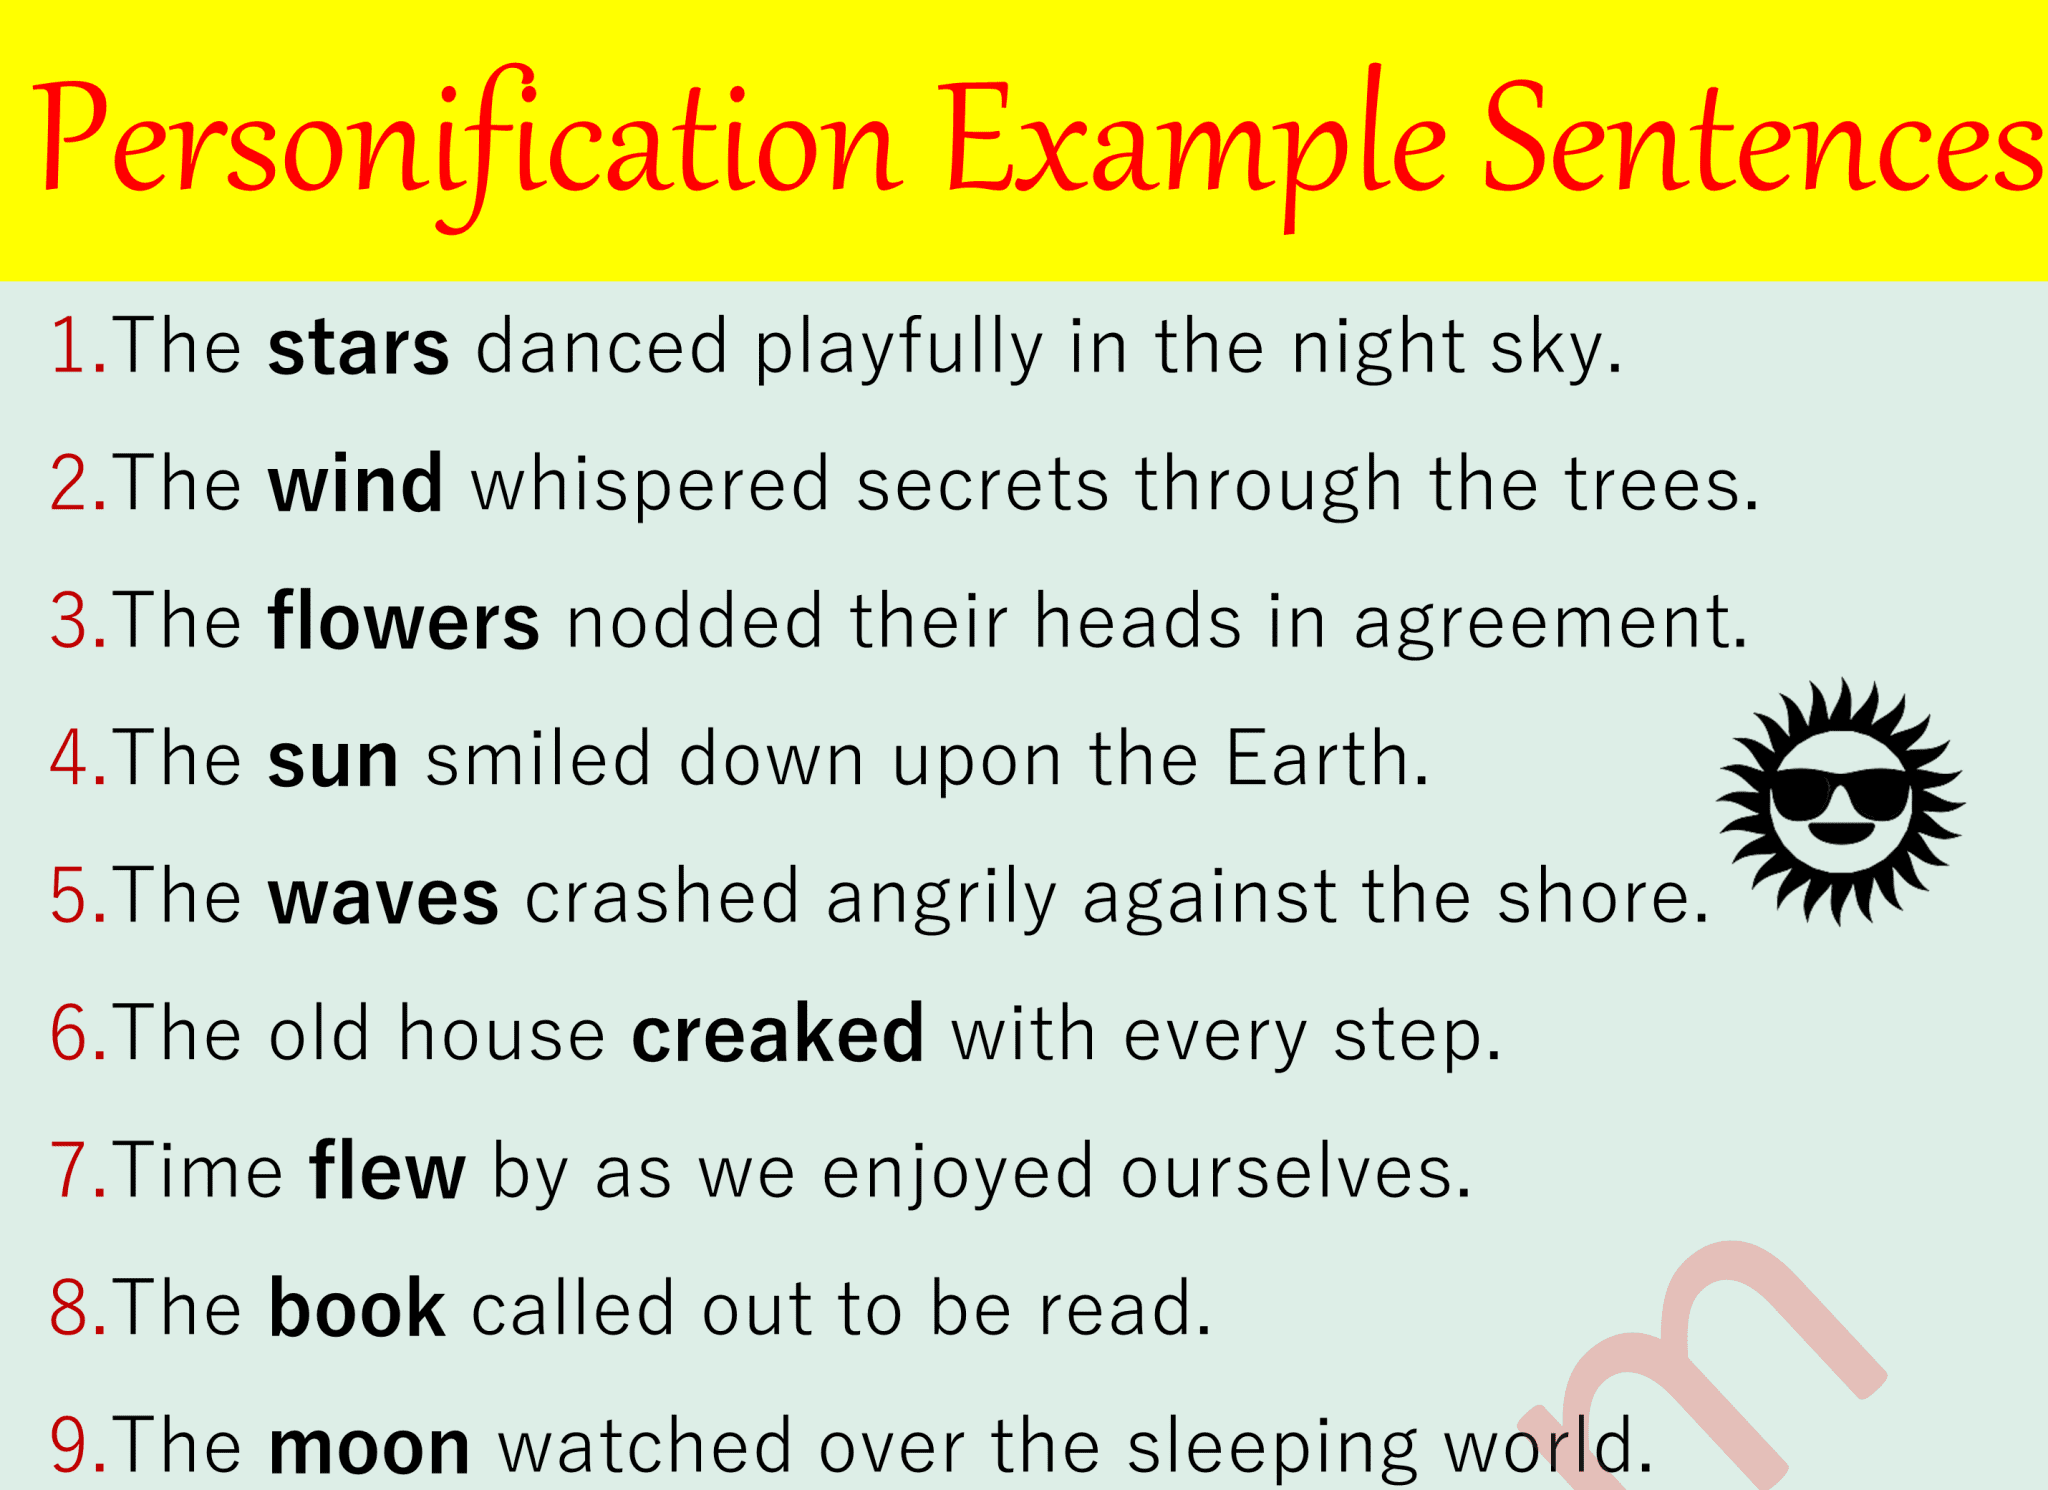 50-example-sentences-of-personification-in-english-ilmrary